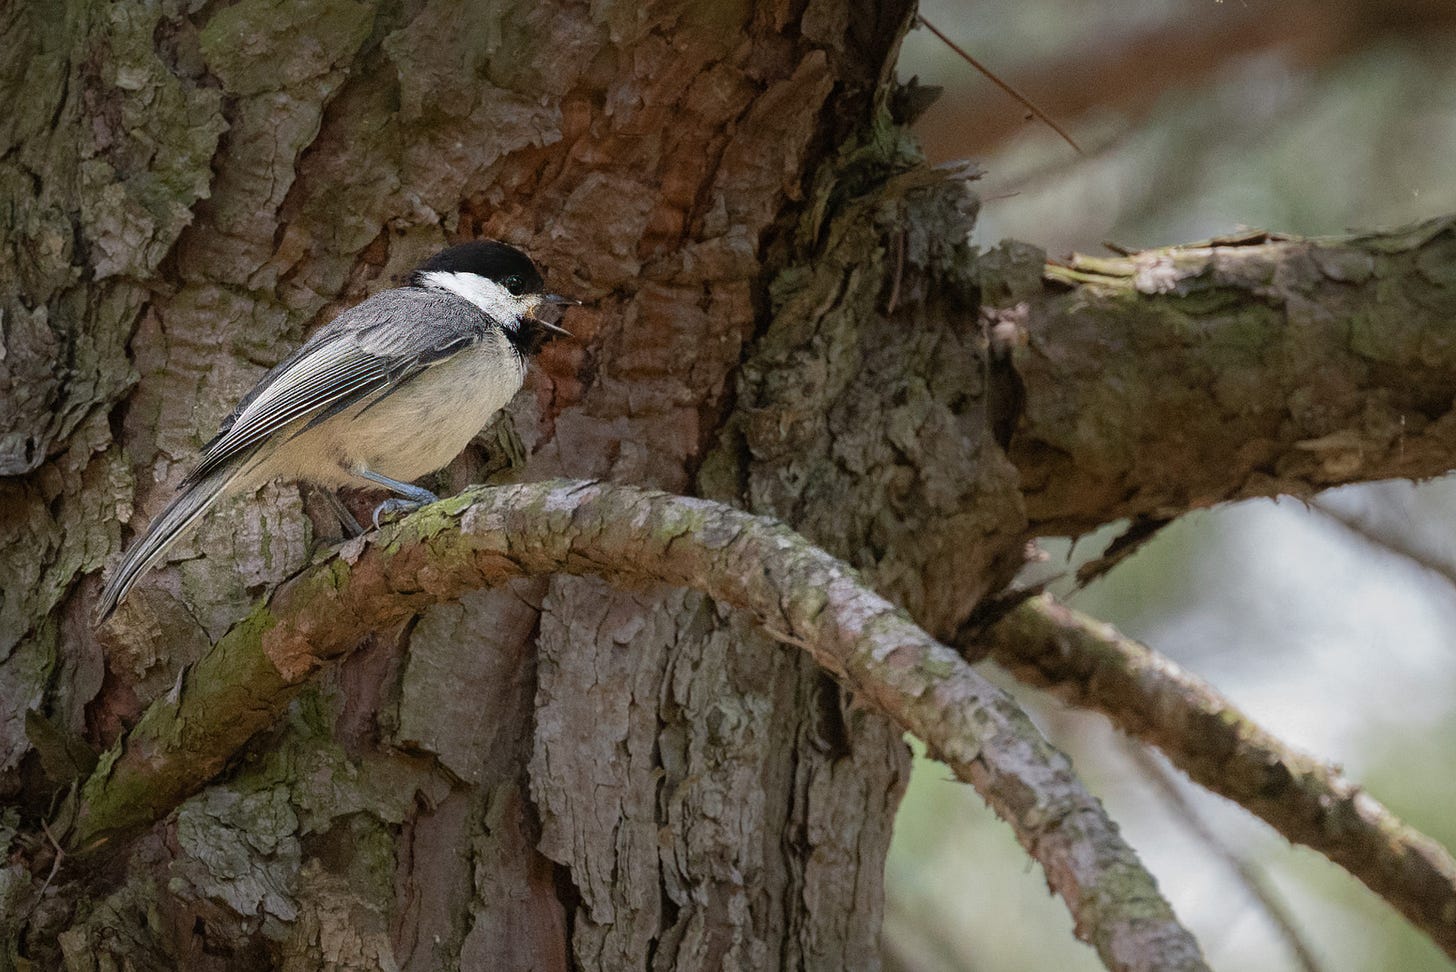 A black and white Carolina Chickadee bird sitting on the branch of a pine tree limb with the trunk of the tree in the backbround.